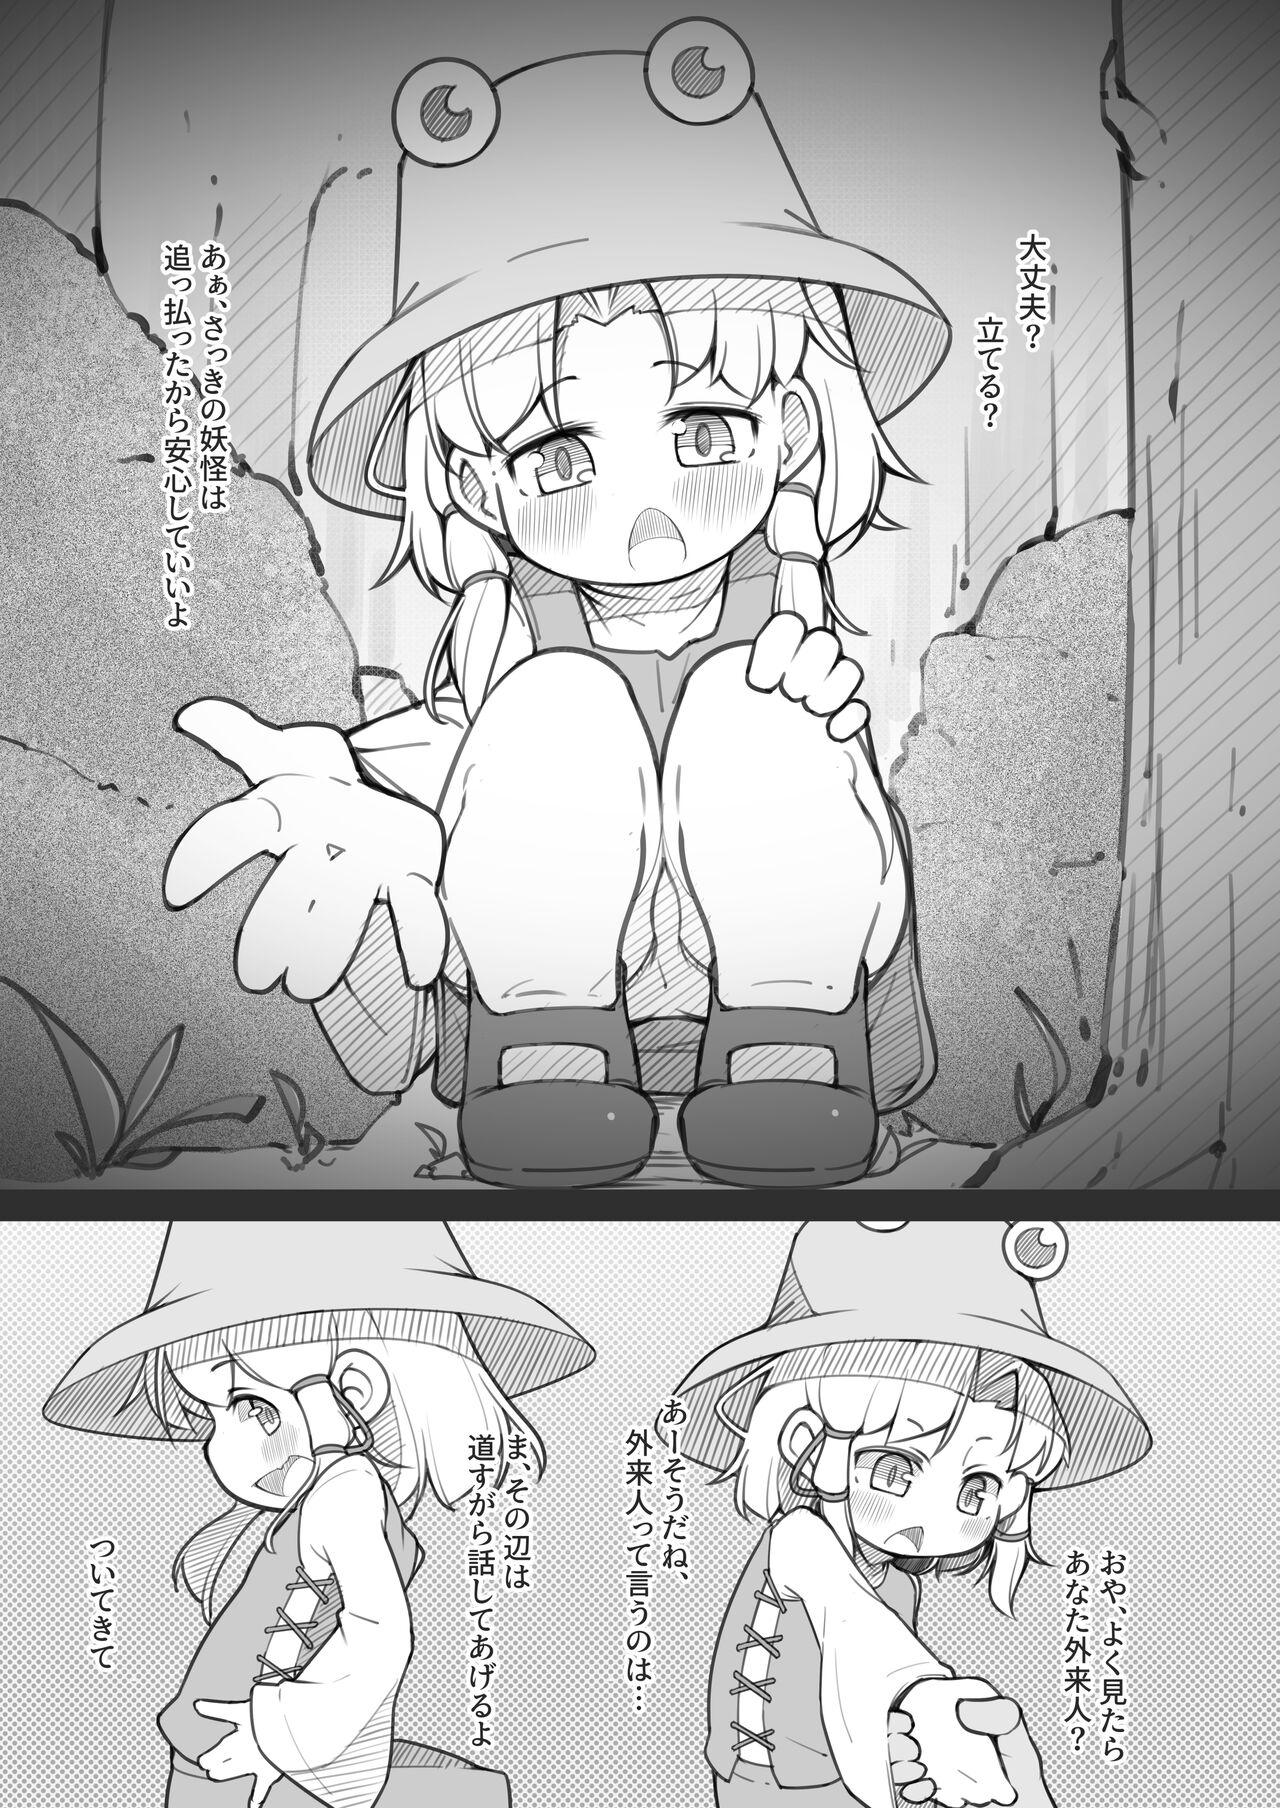 Hot Girl Porn 幻想入りしたカリスマ教祖に諏訪子さまが祀り上げられる話 - Touhou project Outside - Page 2